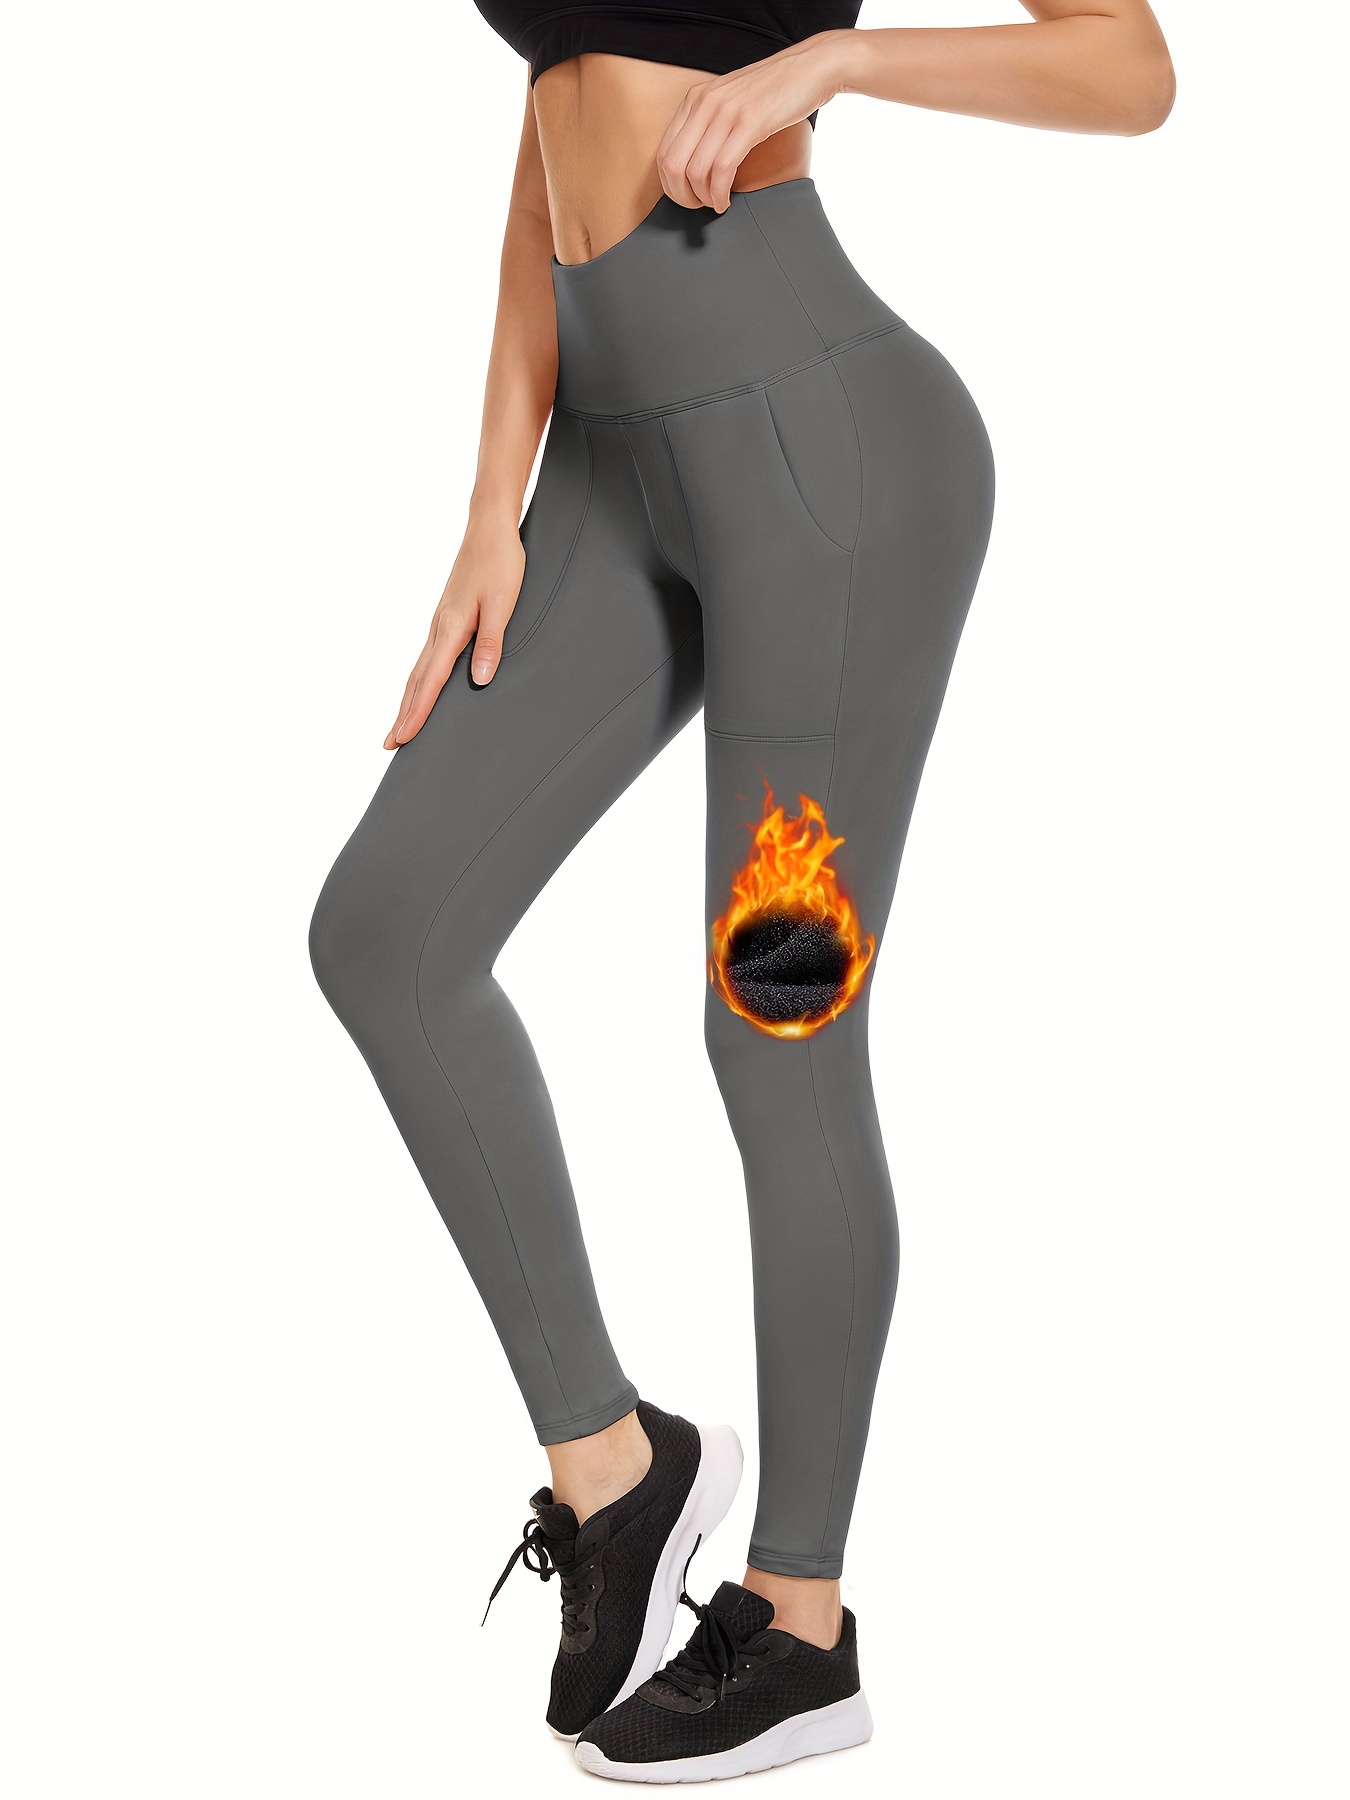 New Thermal Fleece Lined Leggings With Pockets For Women High